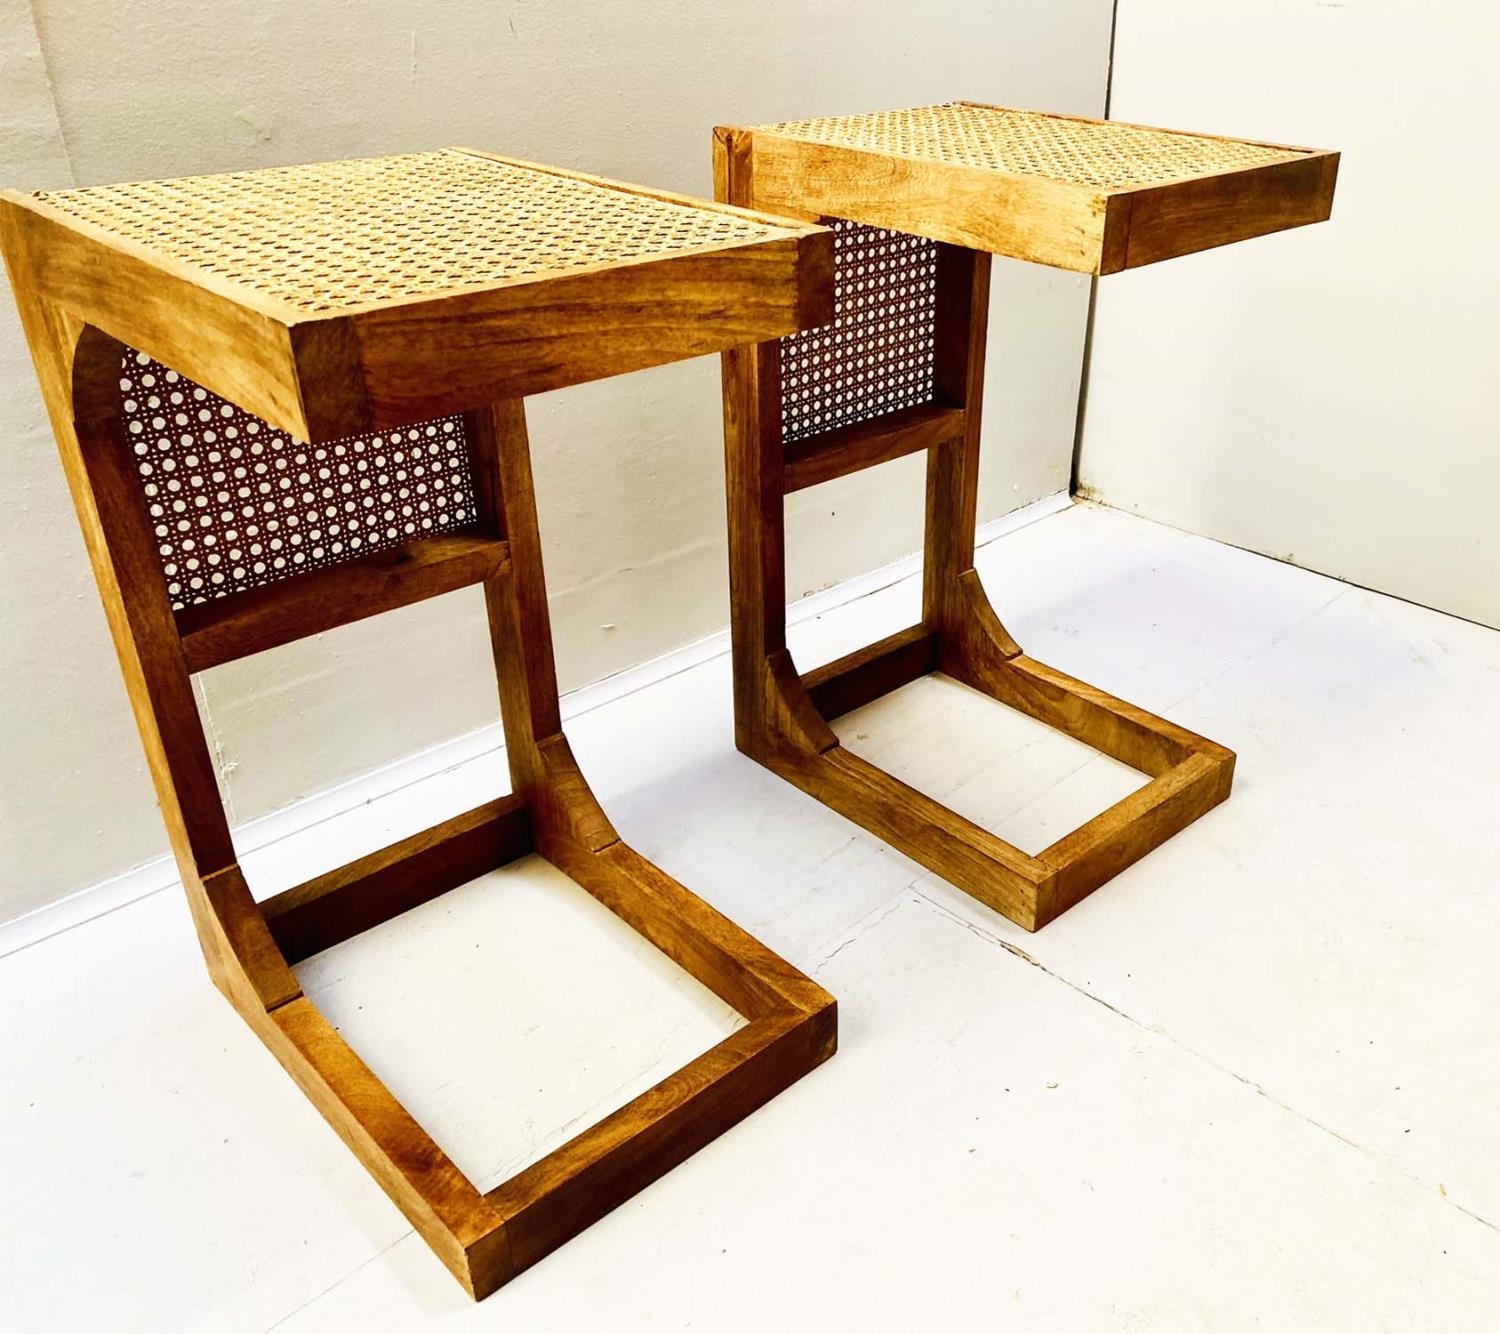 SIDE TABLES, a pair, 1970's Danish style, in wood and rattan, 60cm H x 30cm x 40cm. (2) - Image 5 of 5